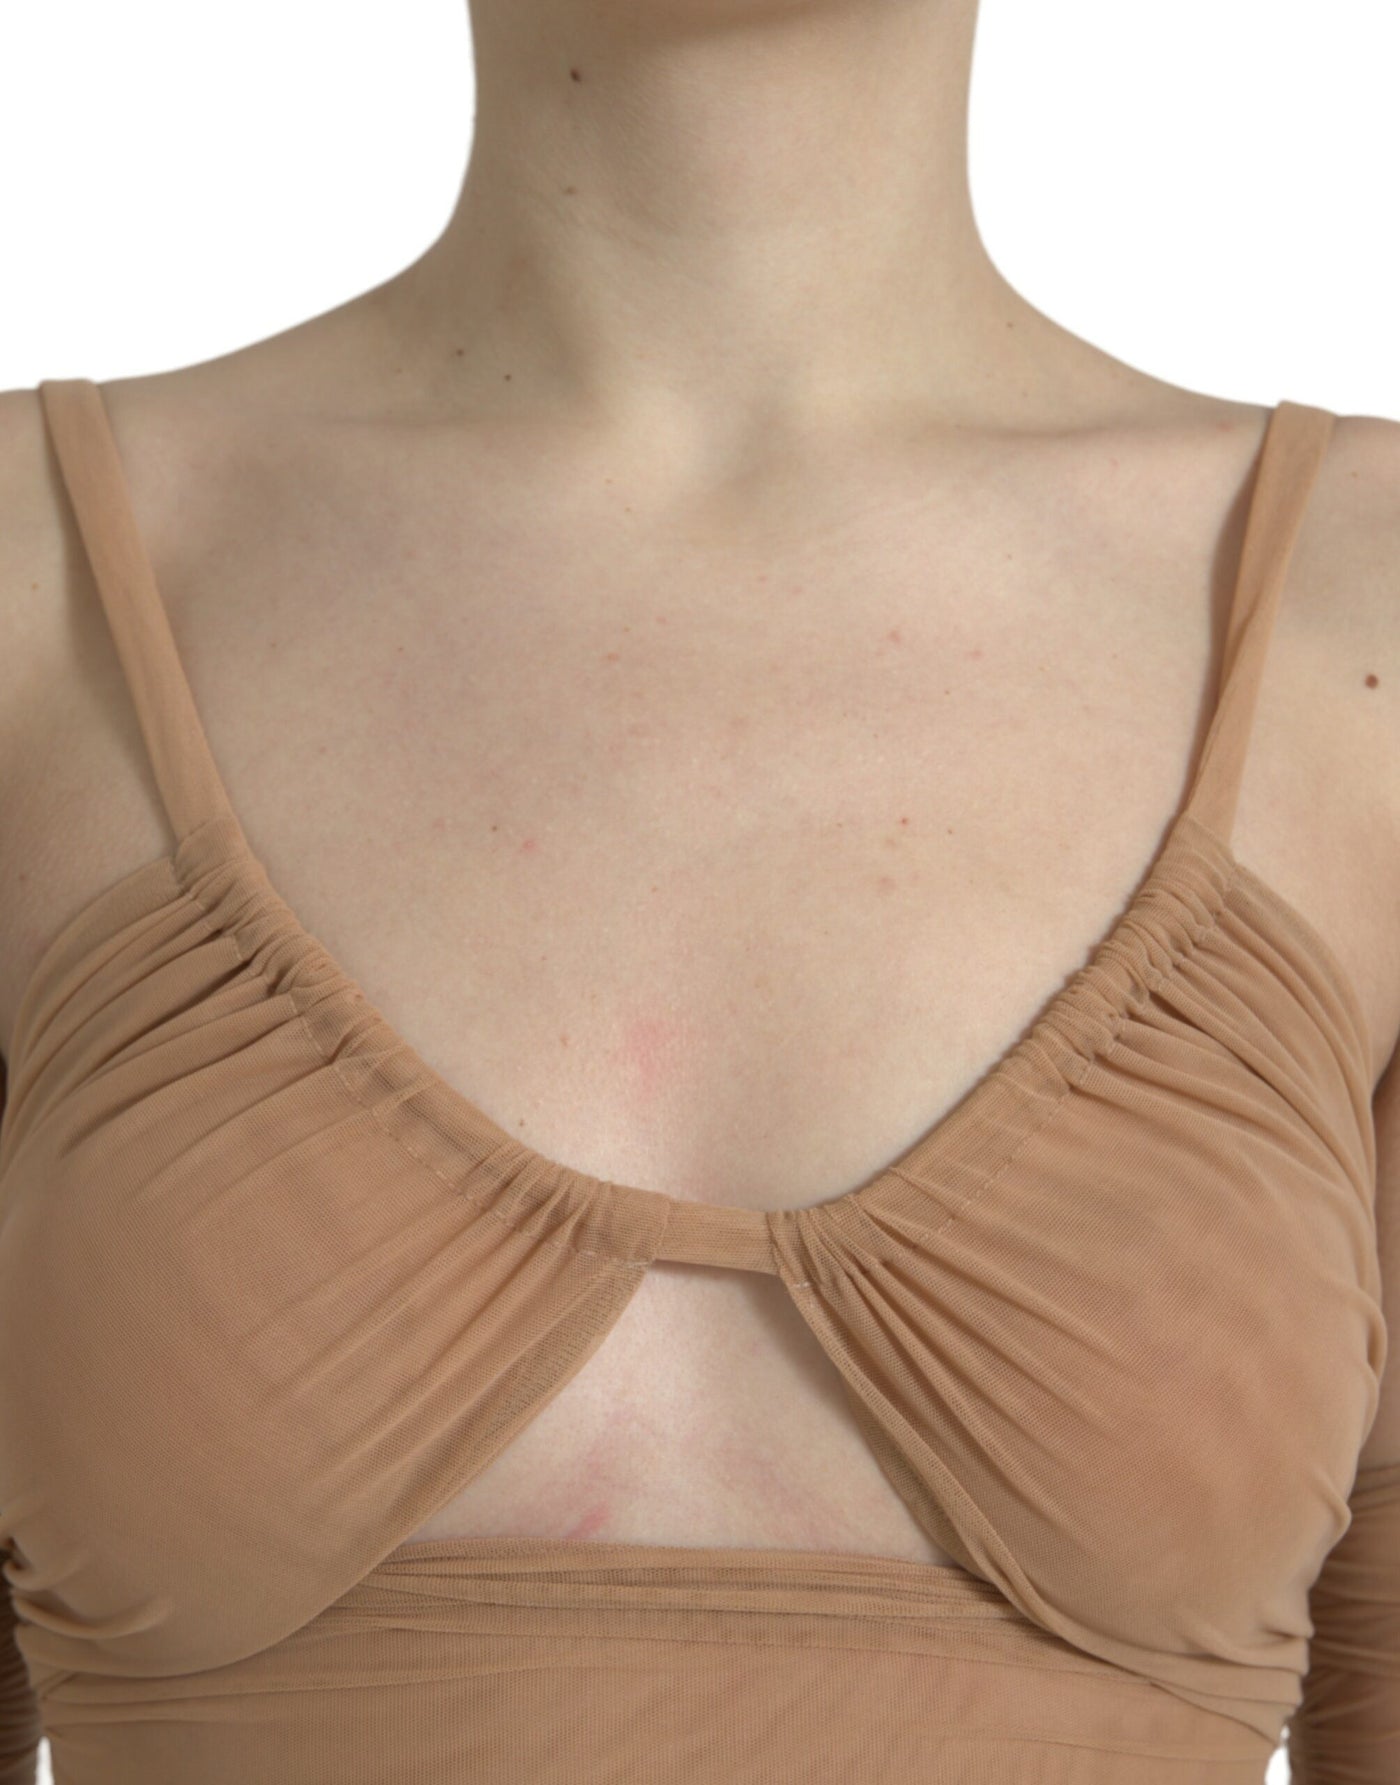 Dolce & Gabbana Brown Nylon Stretch Open Shoulder Cropped Top